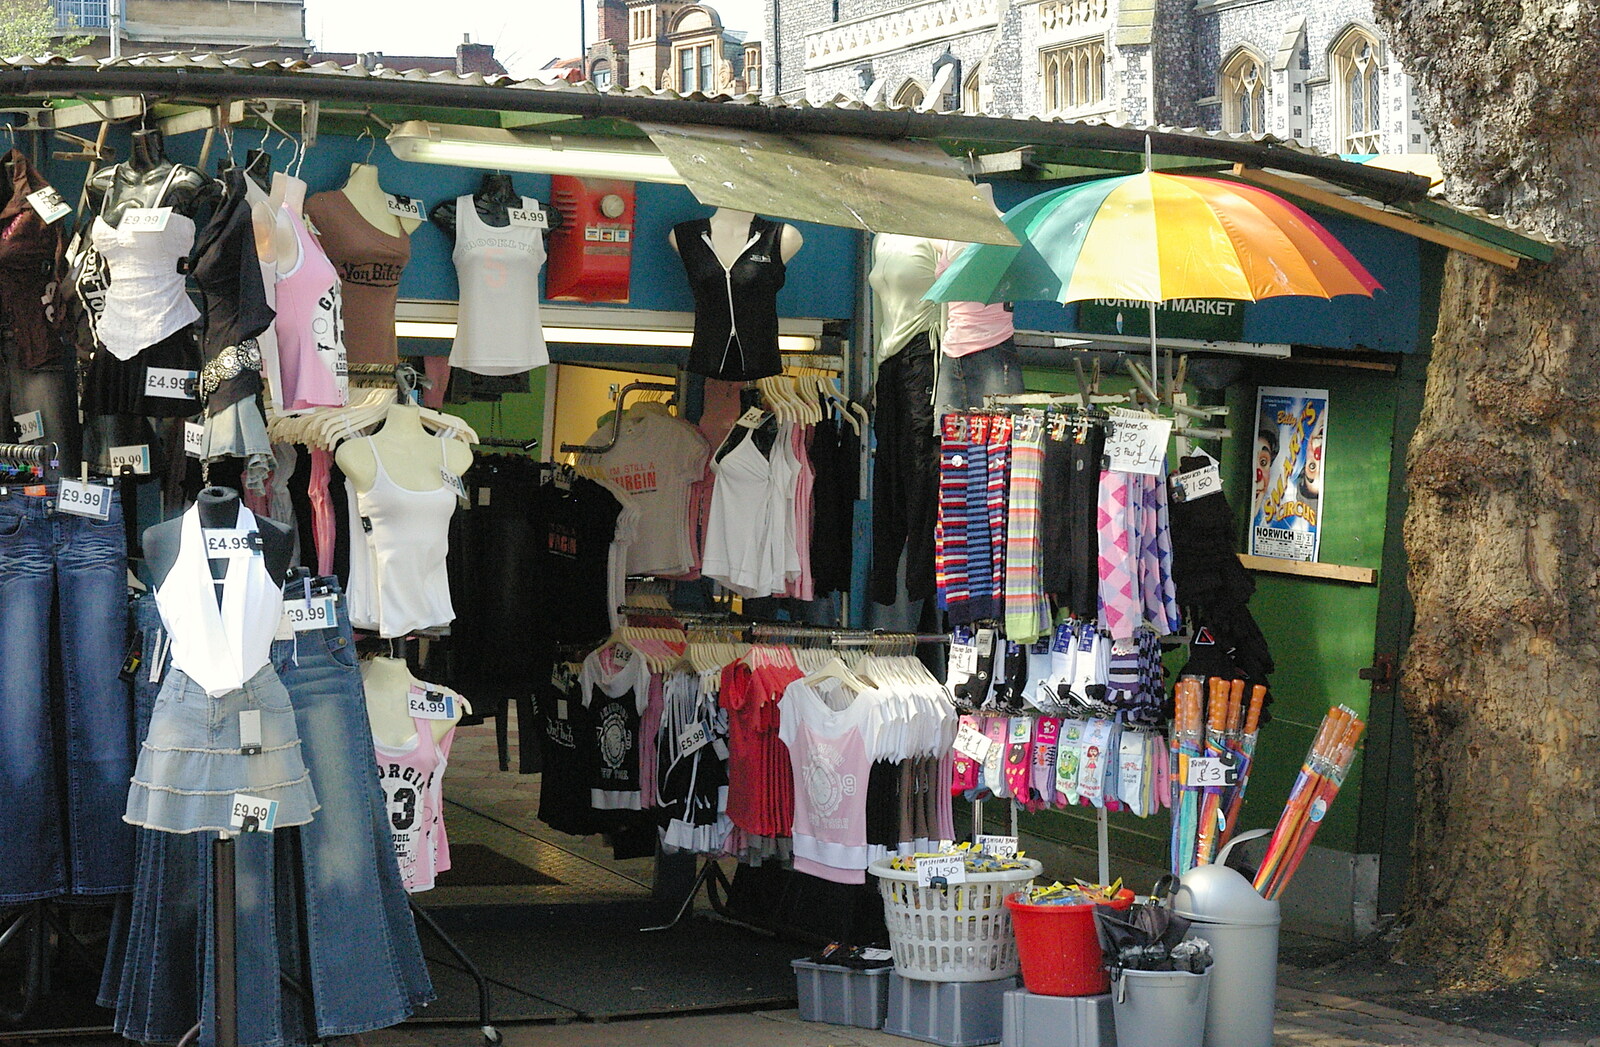 One of the original stalls of Norwich Market from Norwich Market, the BSCC at Occold, and Diss Publishing - 10th April 2005